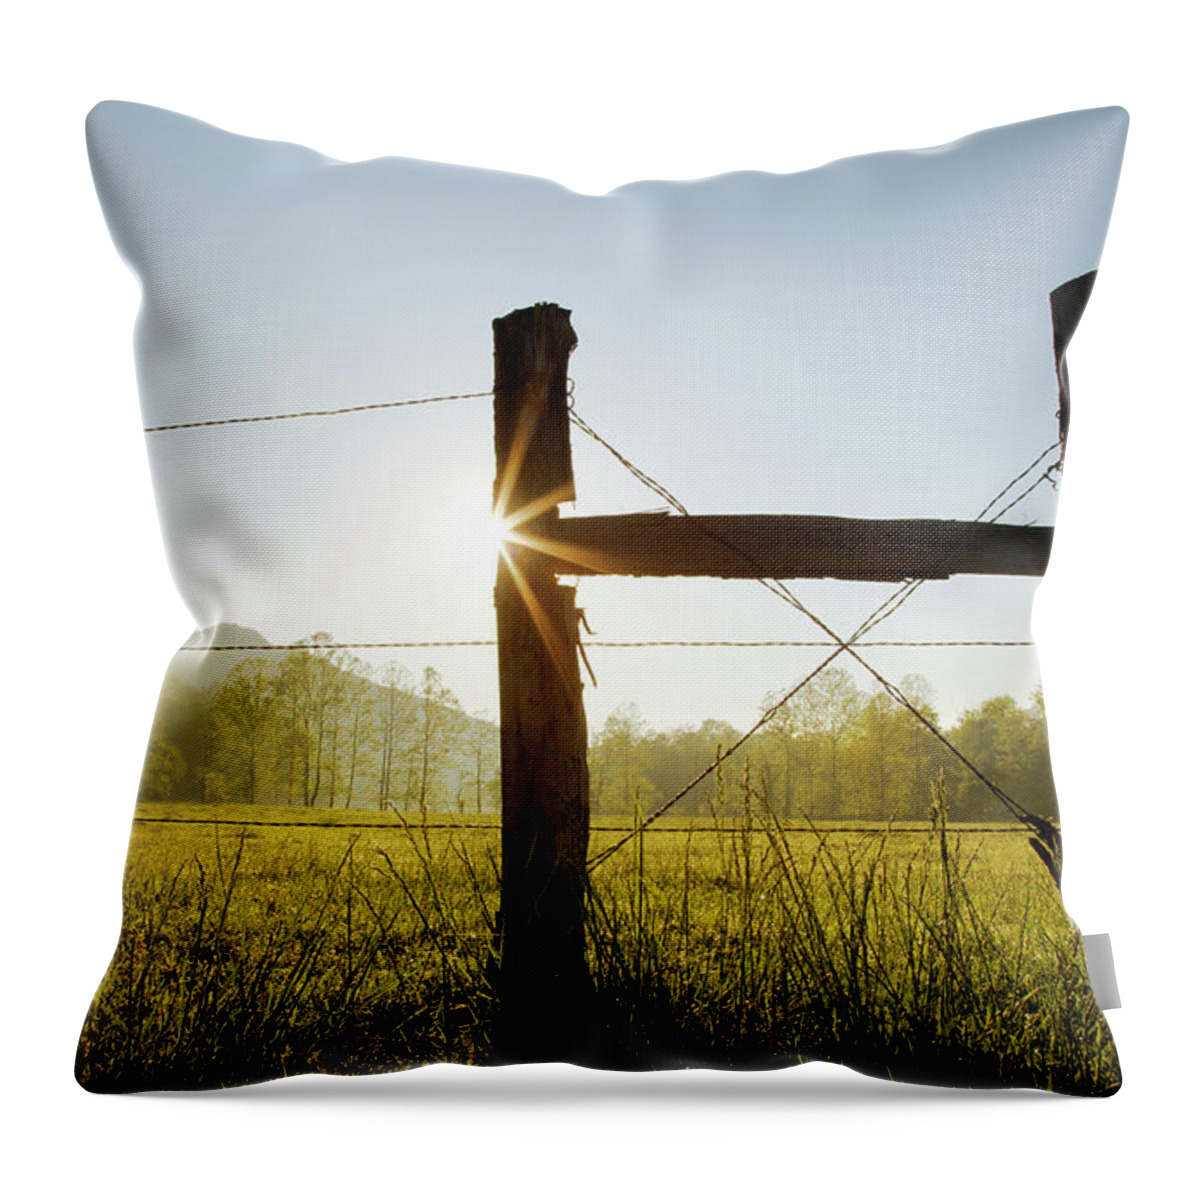 Scenics Throw Pillow featuring the photograph Silhouetted Fence Posts At Sunrise by Adam Jones